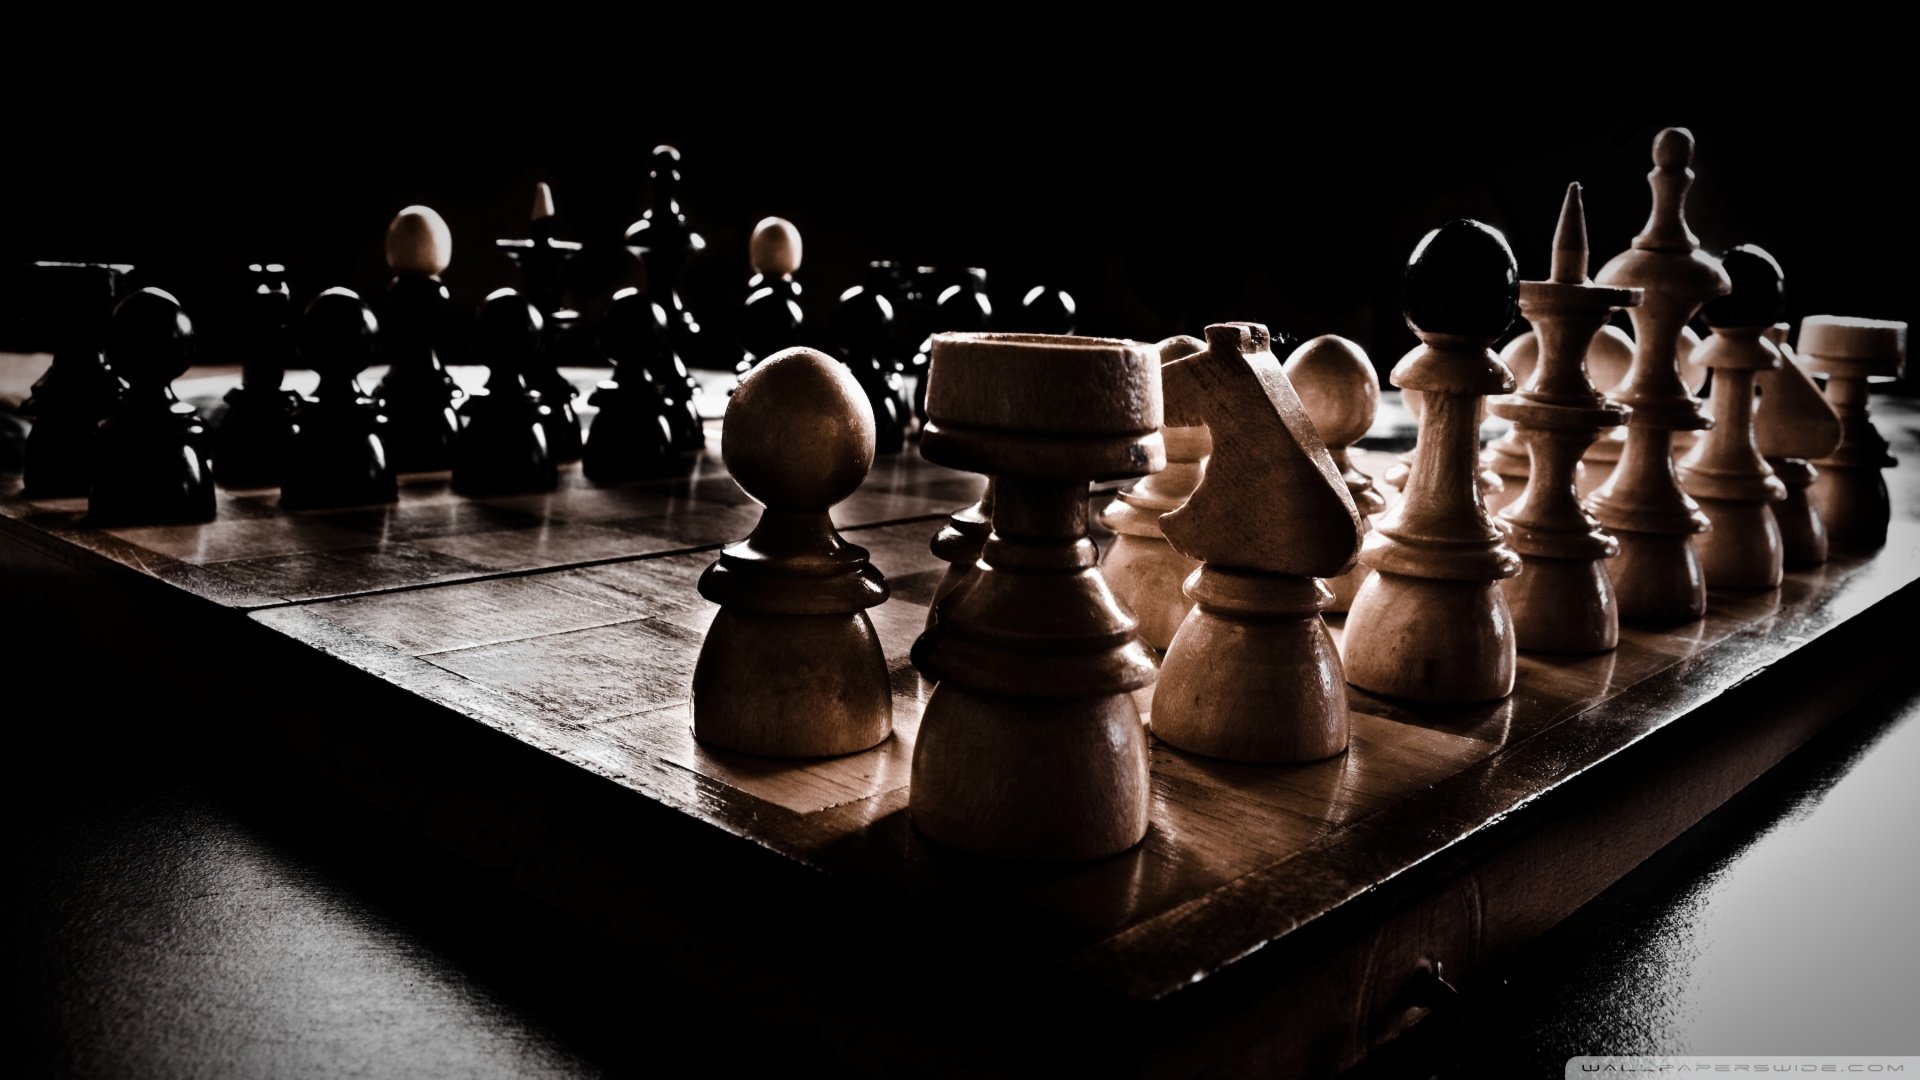 chess, Board wallpaper 1920x1080 Wallpapers HD / Desktop and Mobile